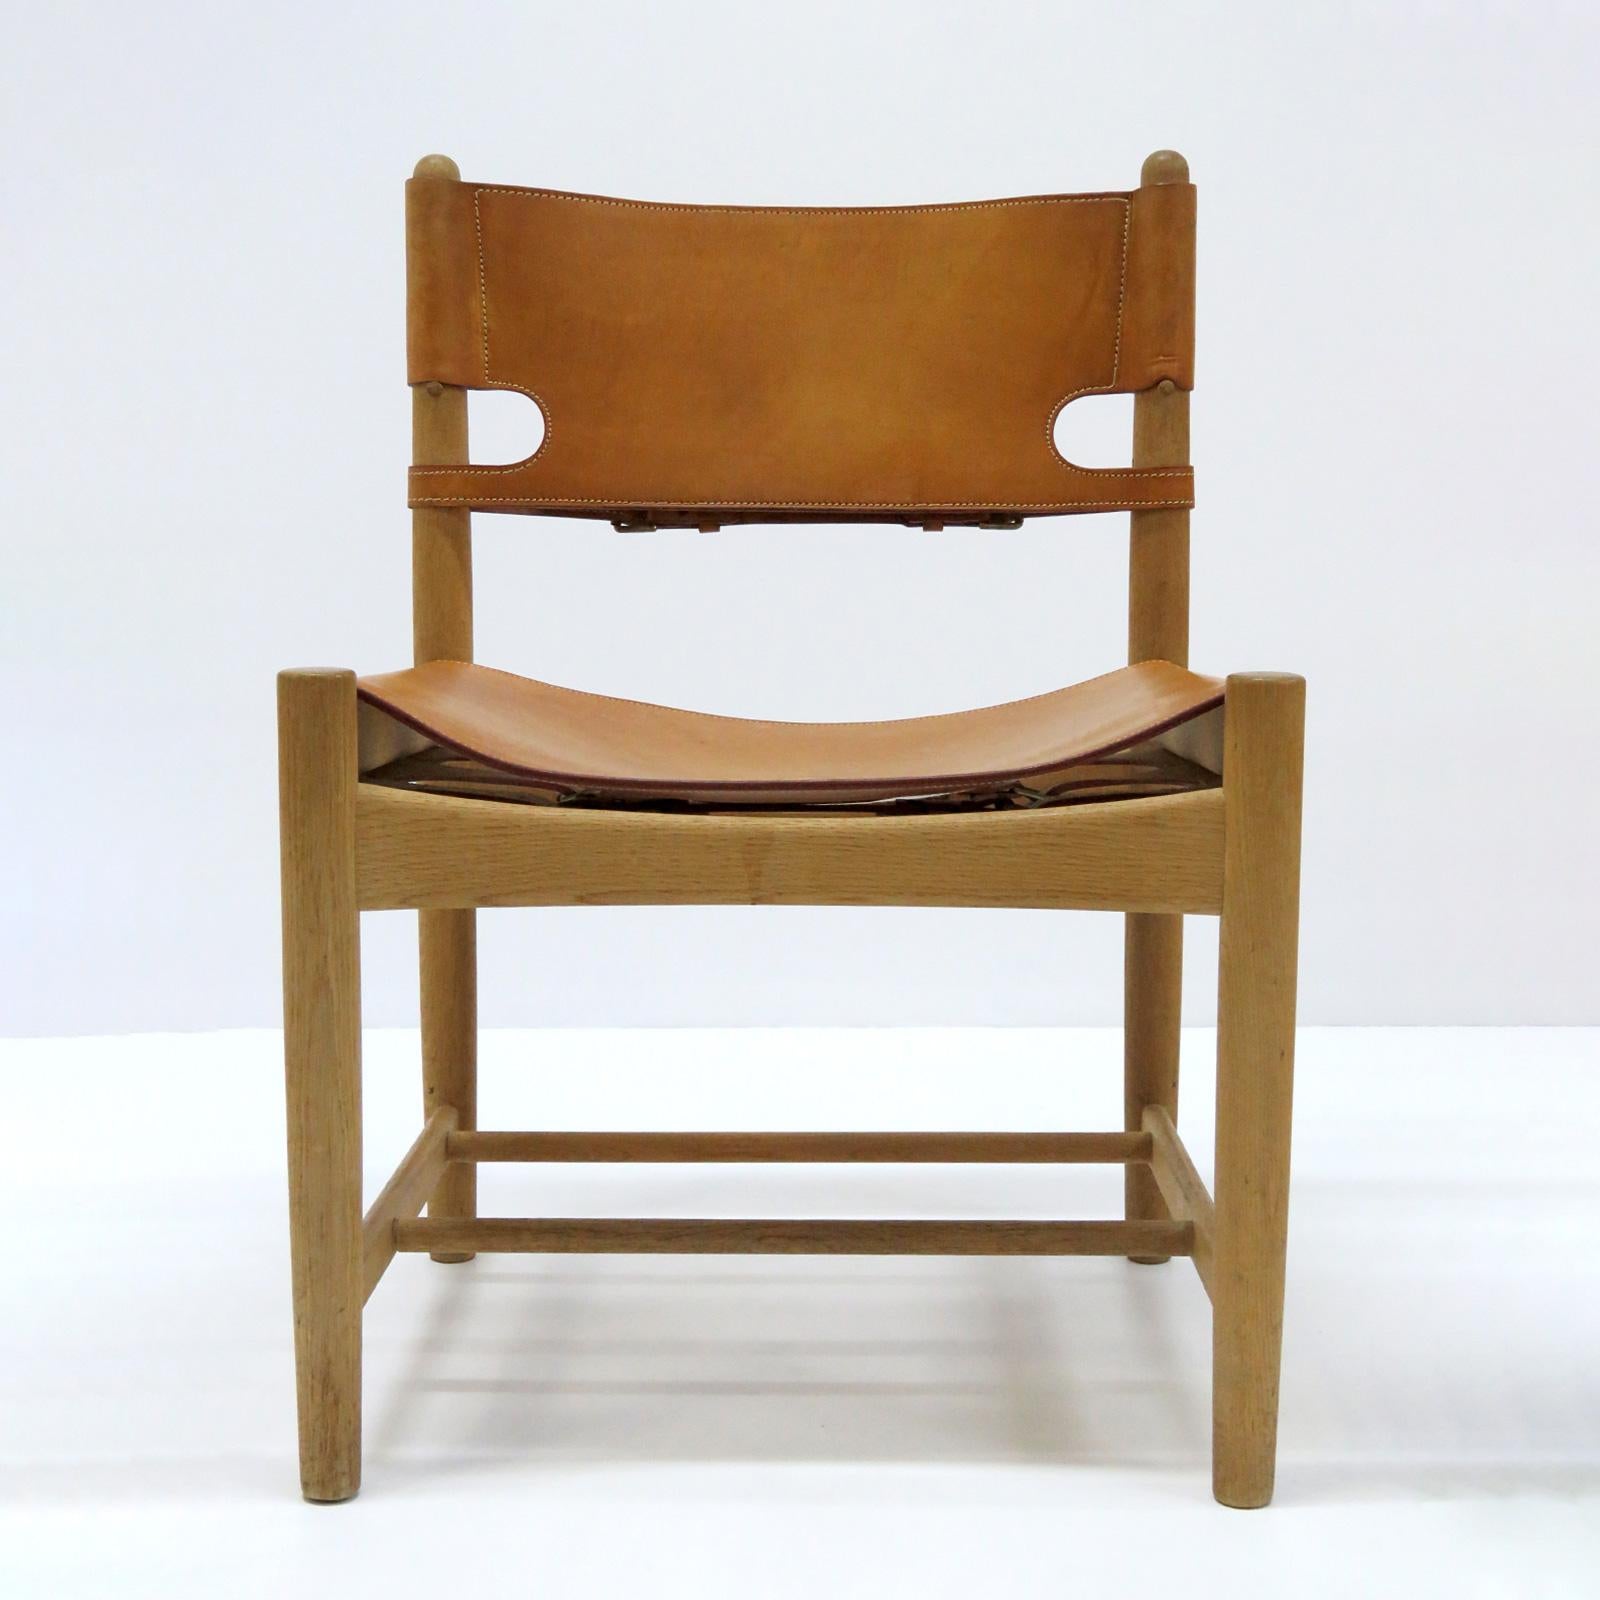 Wonderful set of eight Børge Mogensen 'Hunting' chairs, model no. 3237 for Fredericia Furniture, with saddle leather on oak frames, great patina.